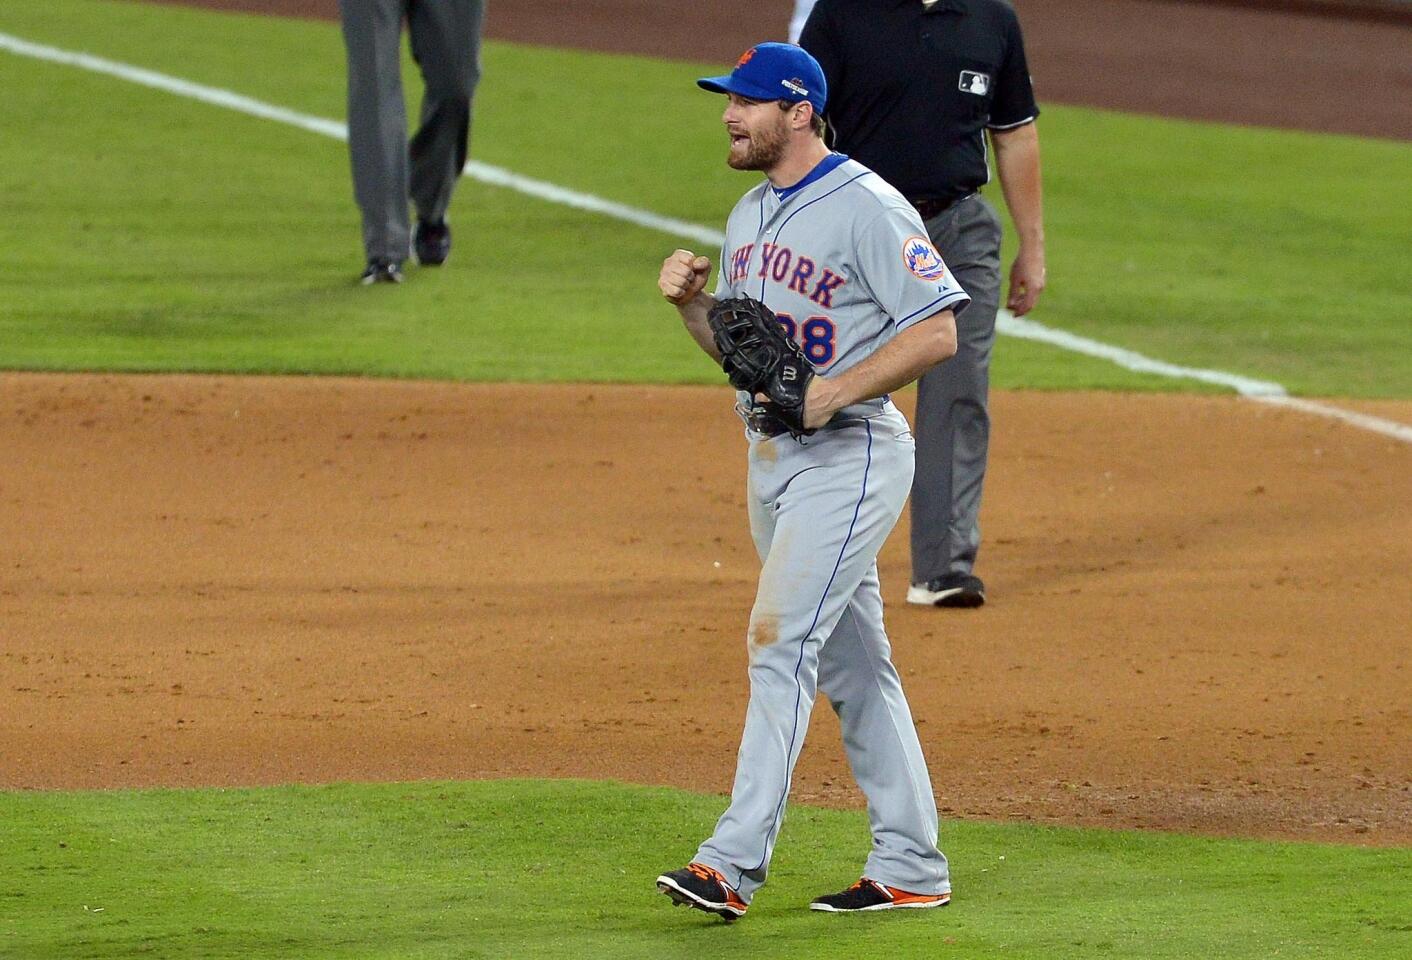 MLB: NLDS-New York Mets at Los Angeles Dodgers